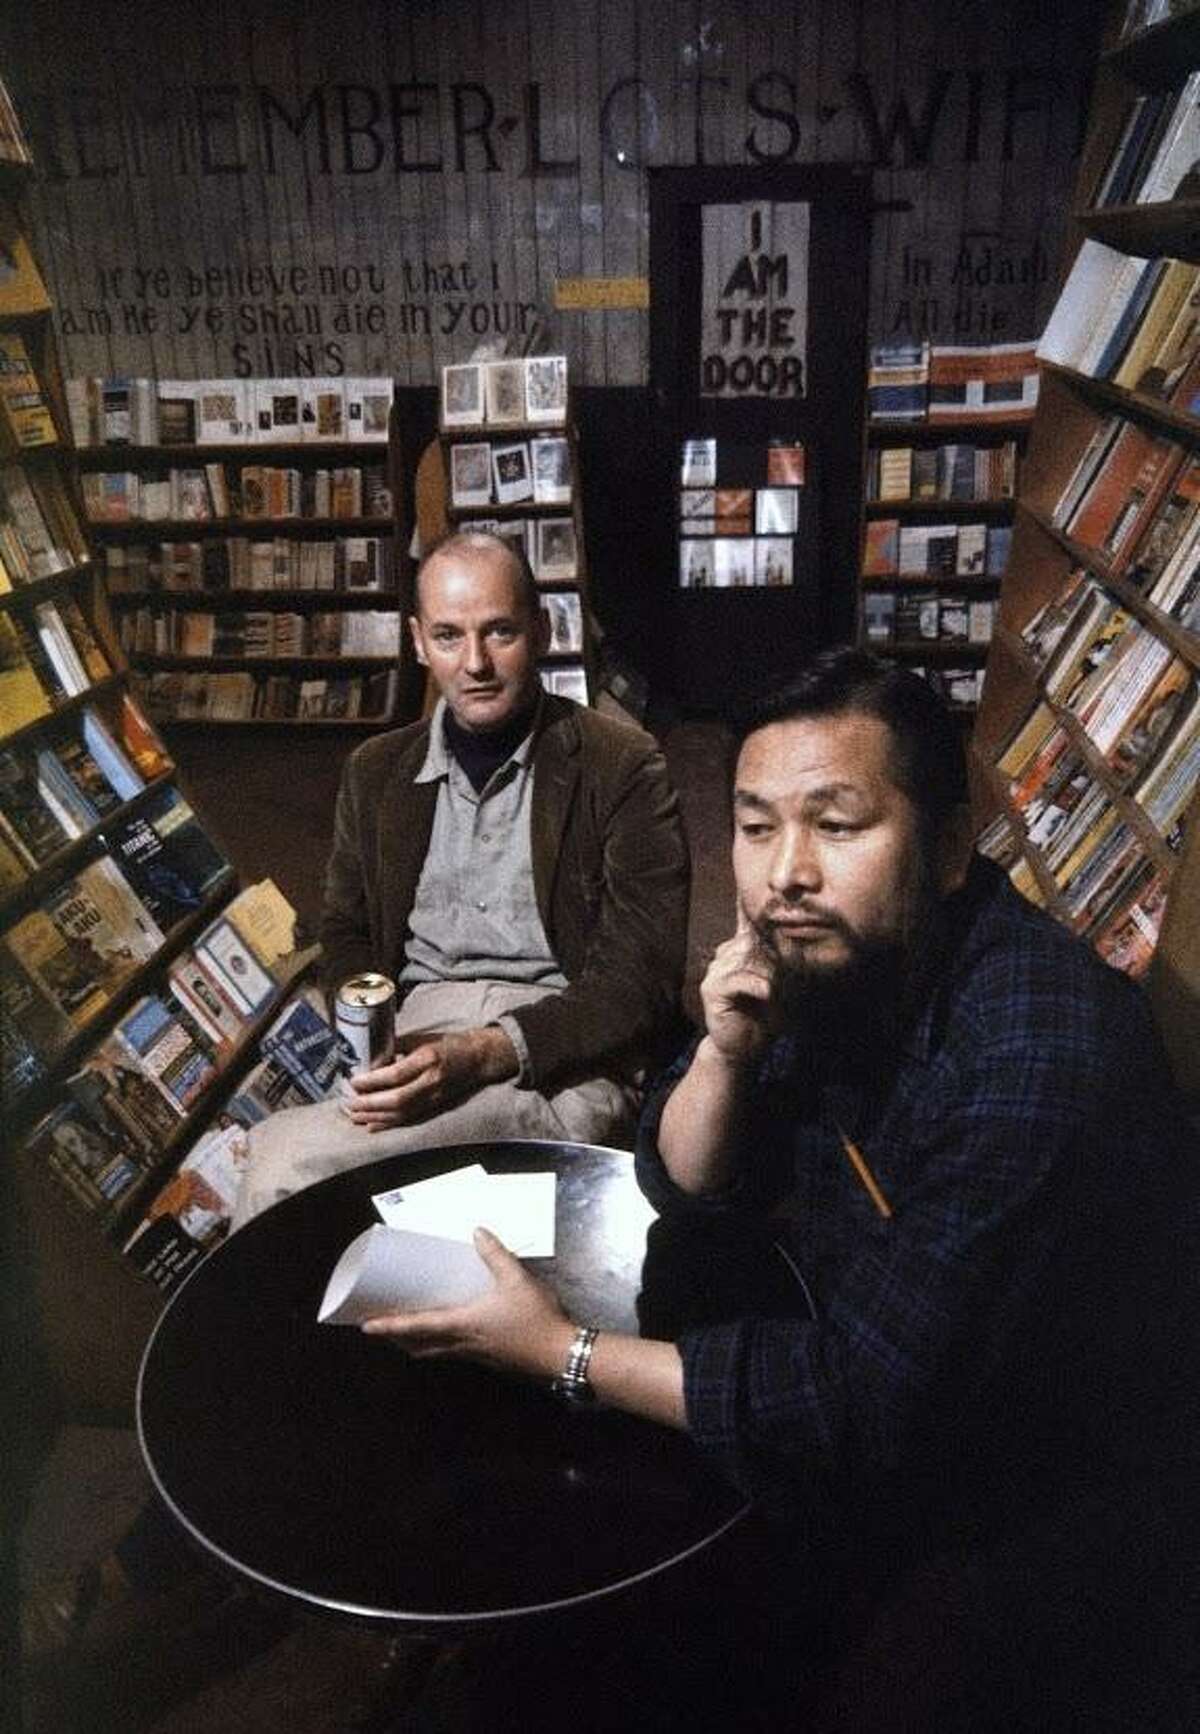 Lawrence Ferlinghetti and manager Shigeyoshi Murao. The City Lights is the mecca for all beat writers and many of them receive their mail here. The shop use to be a mission house hence the sign on the wall unaltered in the past 50 years, reading, “Remember Lot’s wife.”